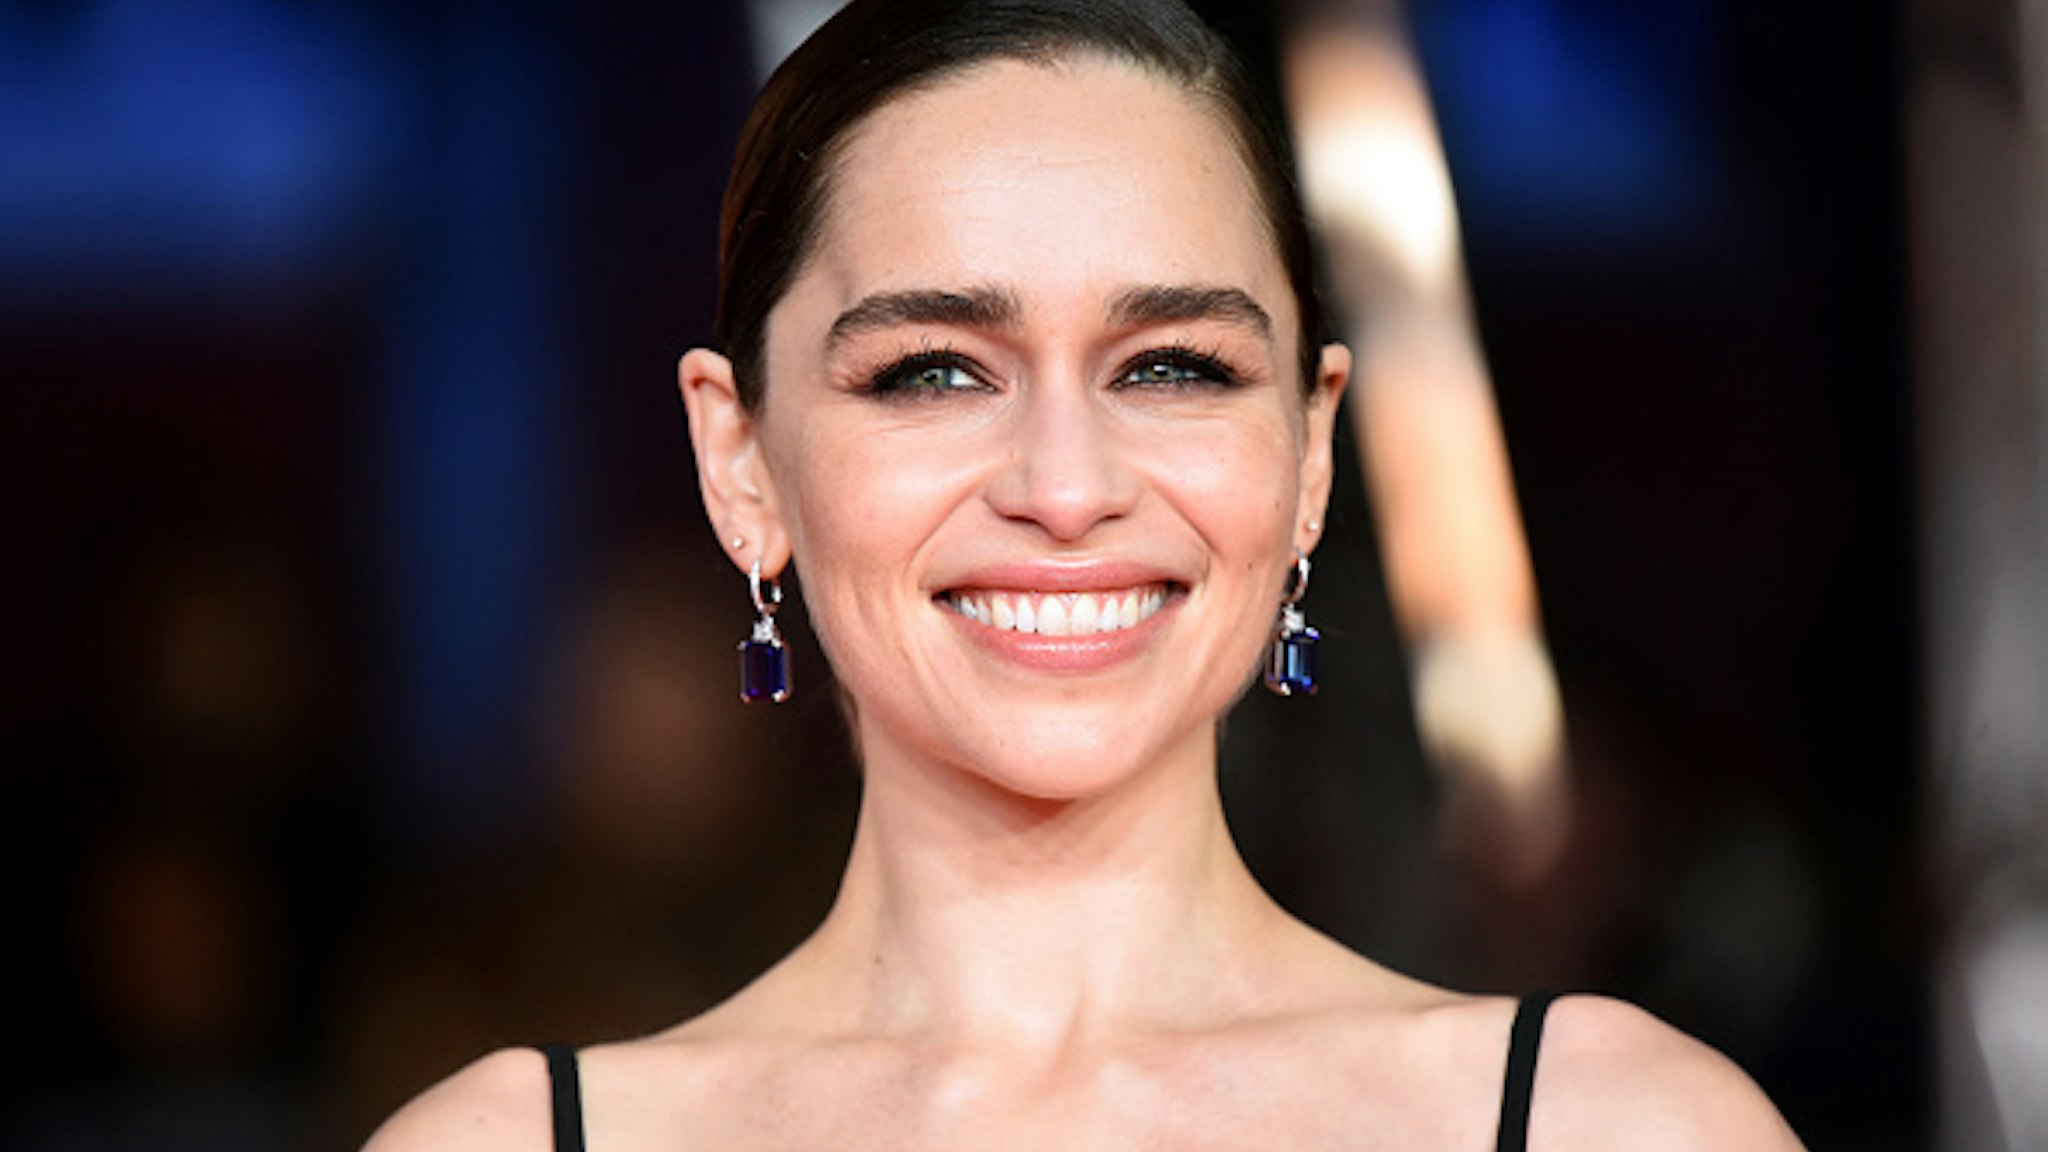 Emilia Clarke attending the 73rd British Academy Film Awards held at the Royal Albert Hall, London.